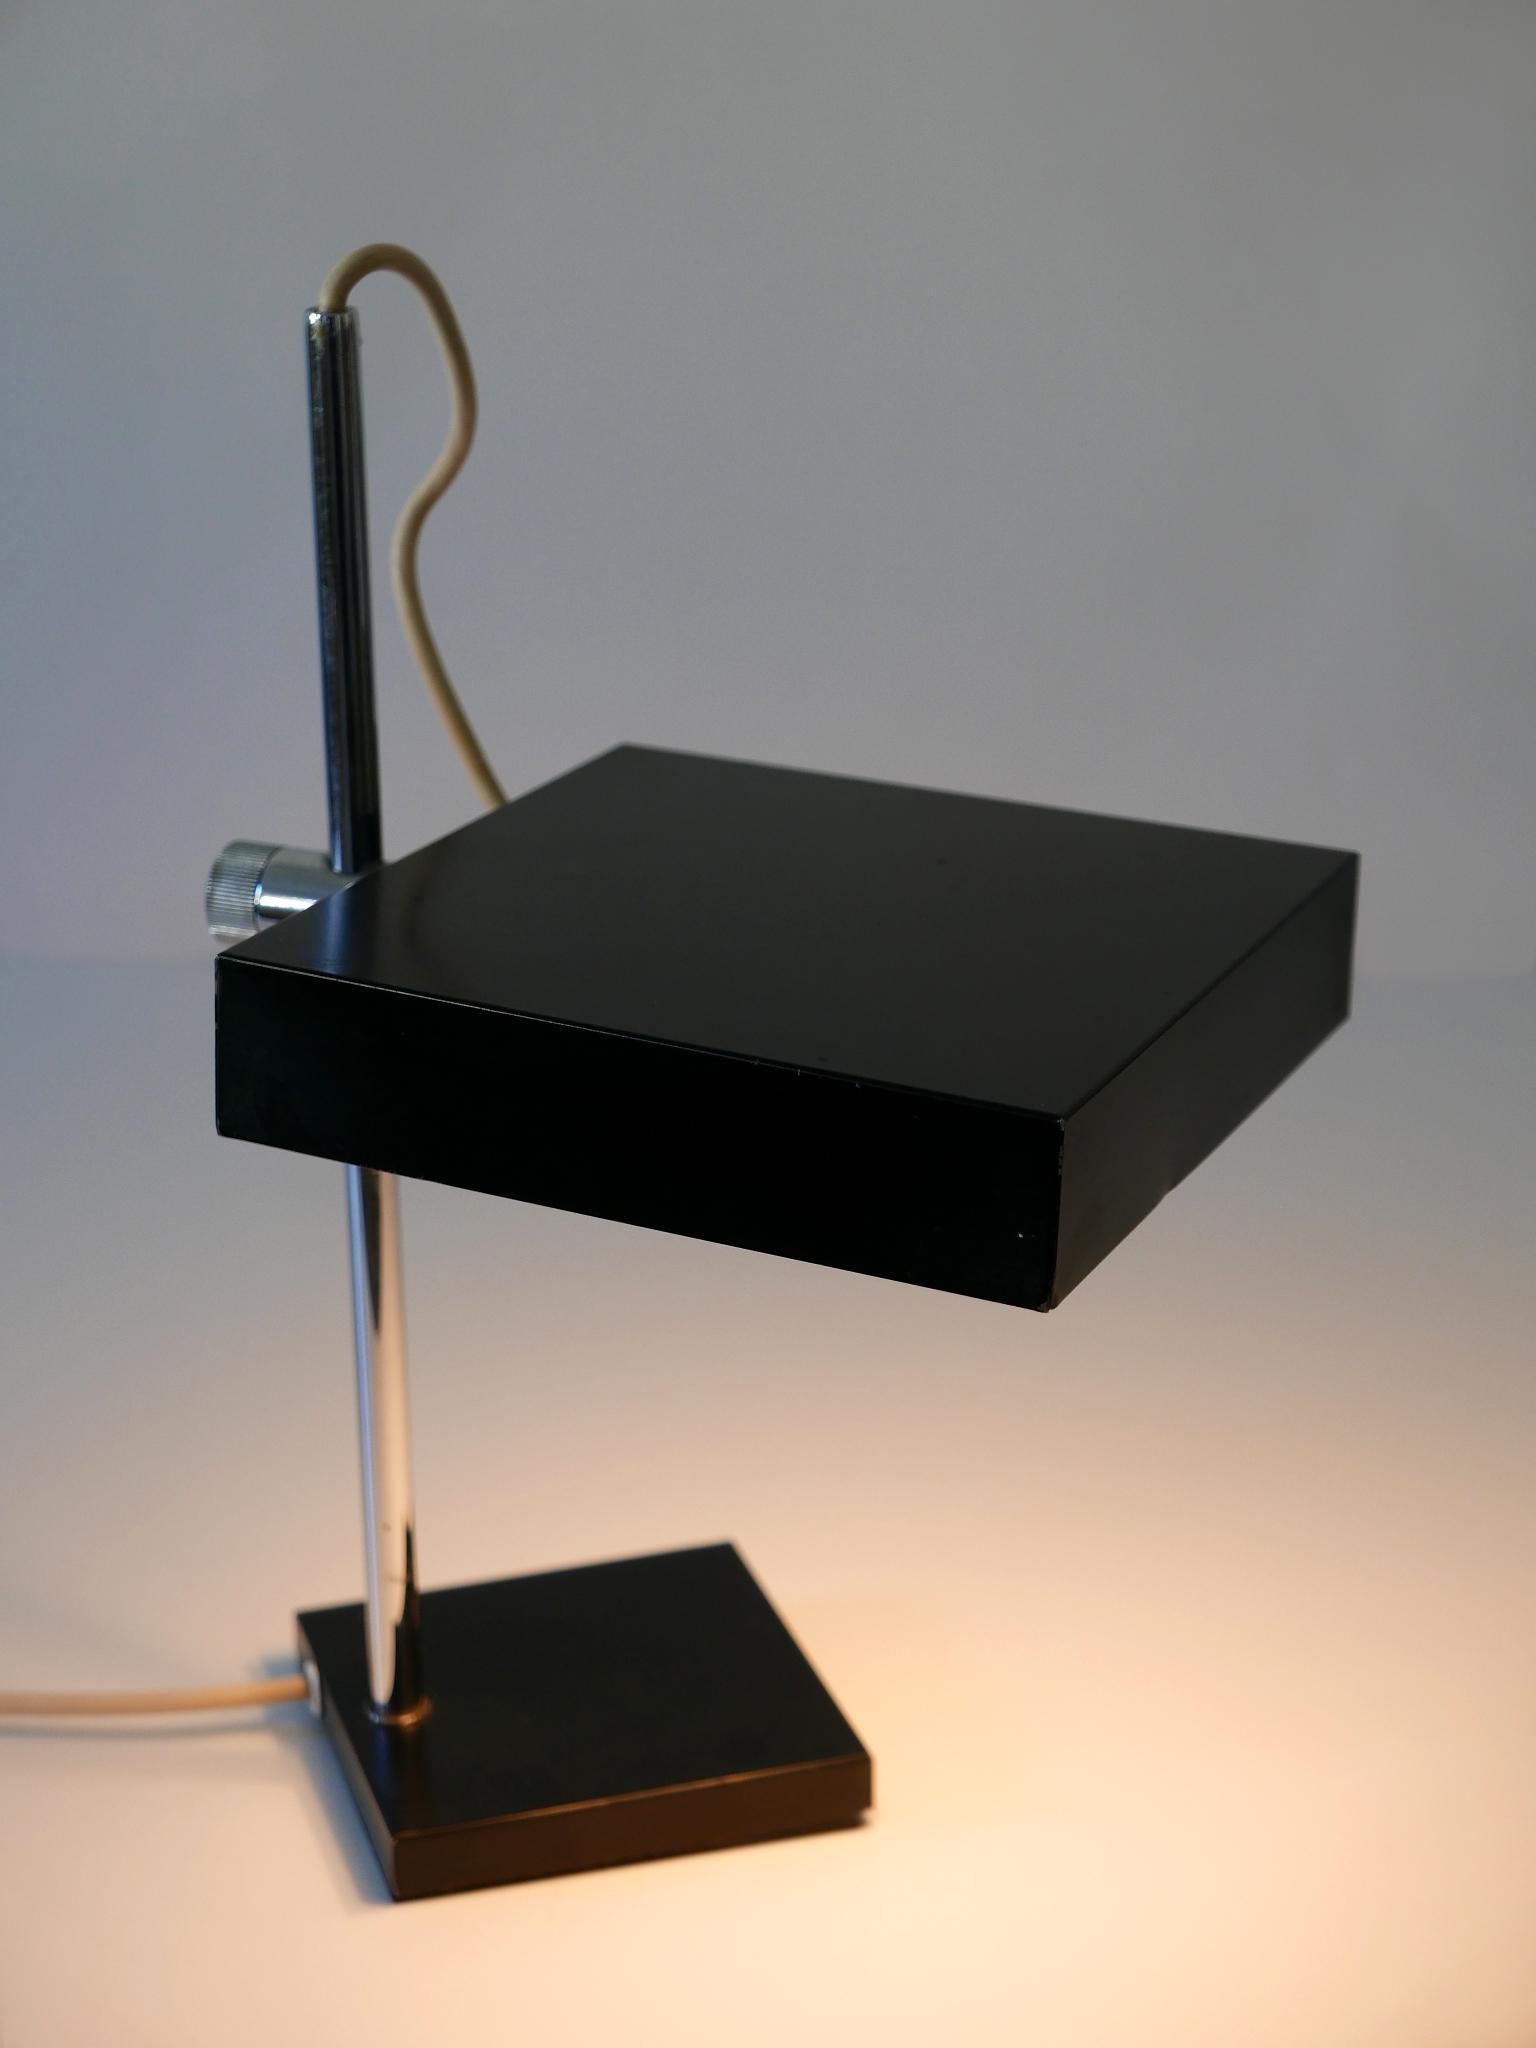 Elegant Mid-Century Modern table lamp or desk light. Modell No 6640. Manufactured by Kaiser Leuchten, 1960s, Germany. Adjustable height and shade.

Executed in black enameled steel, chrome-plated brass tube, the desk light comes with 2 x E14 / E12